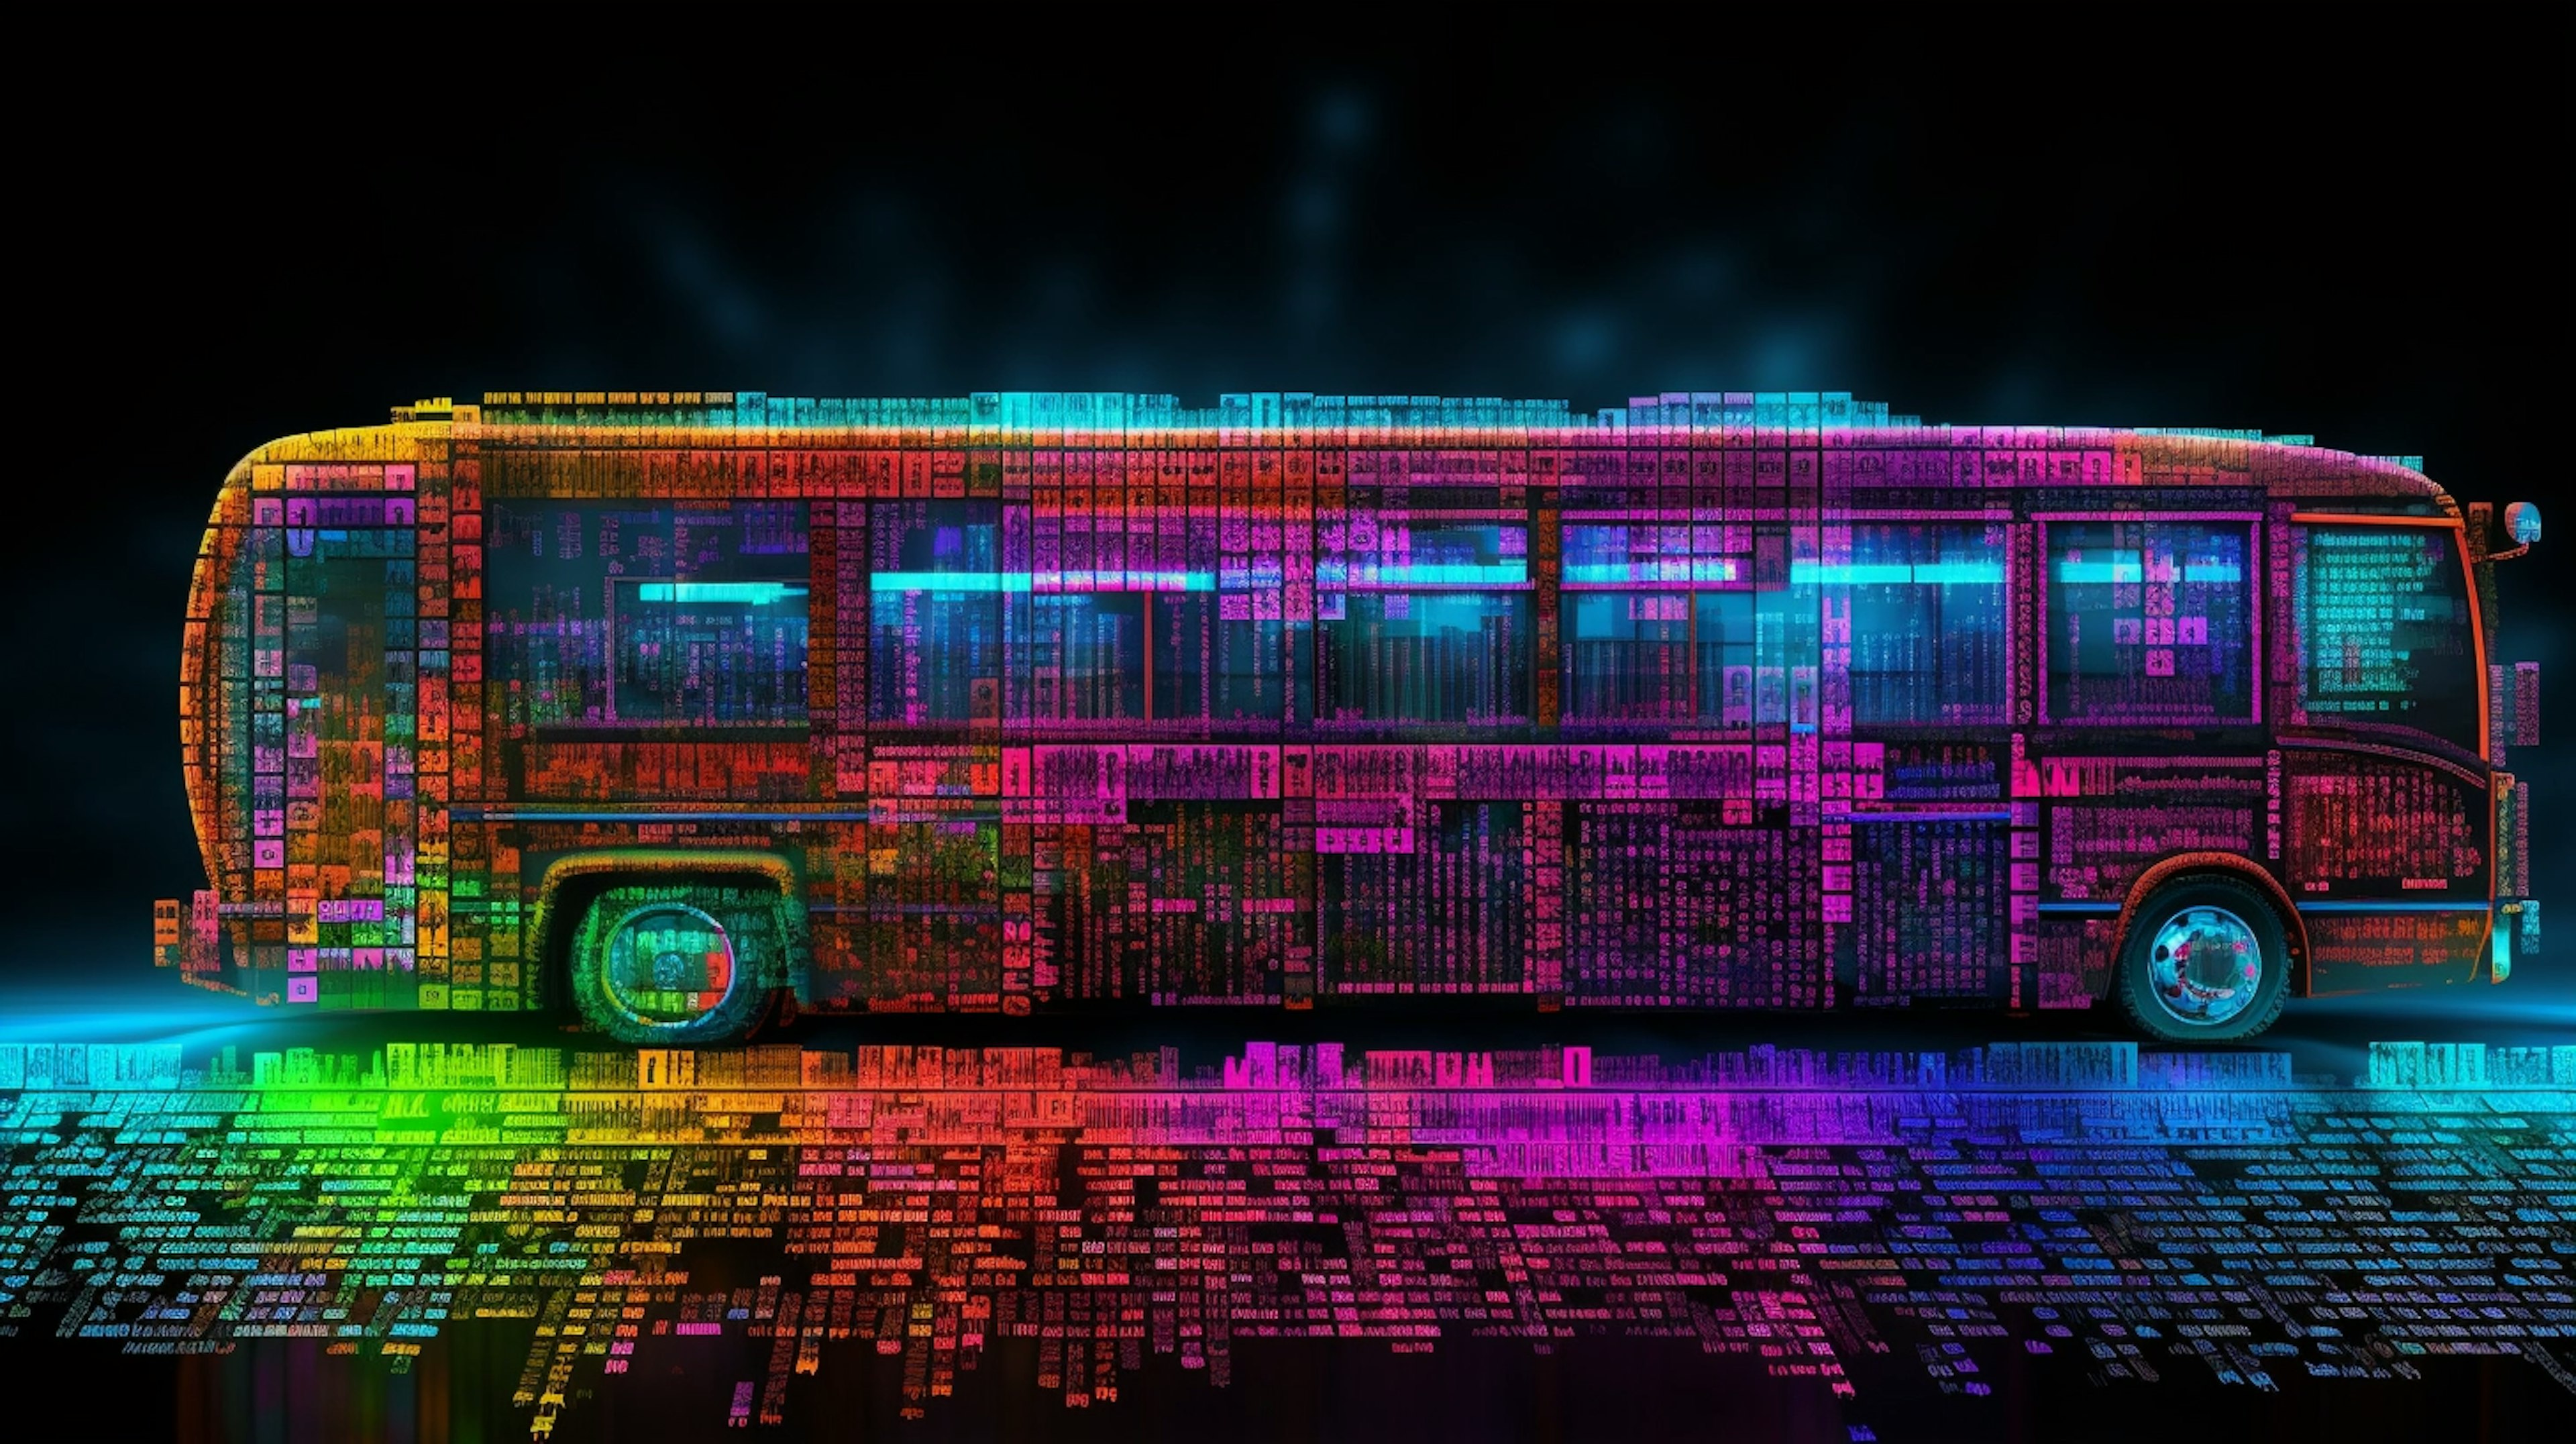 Real Time Bus Tracker